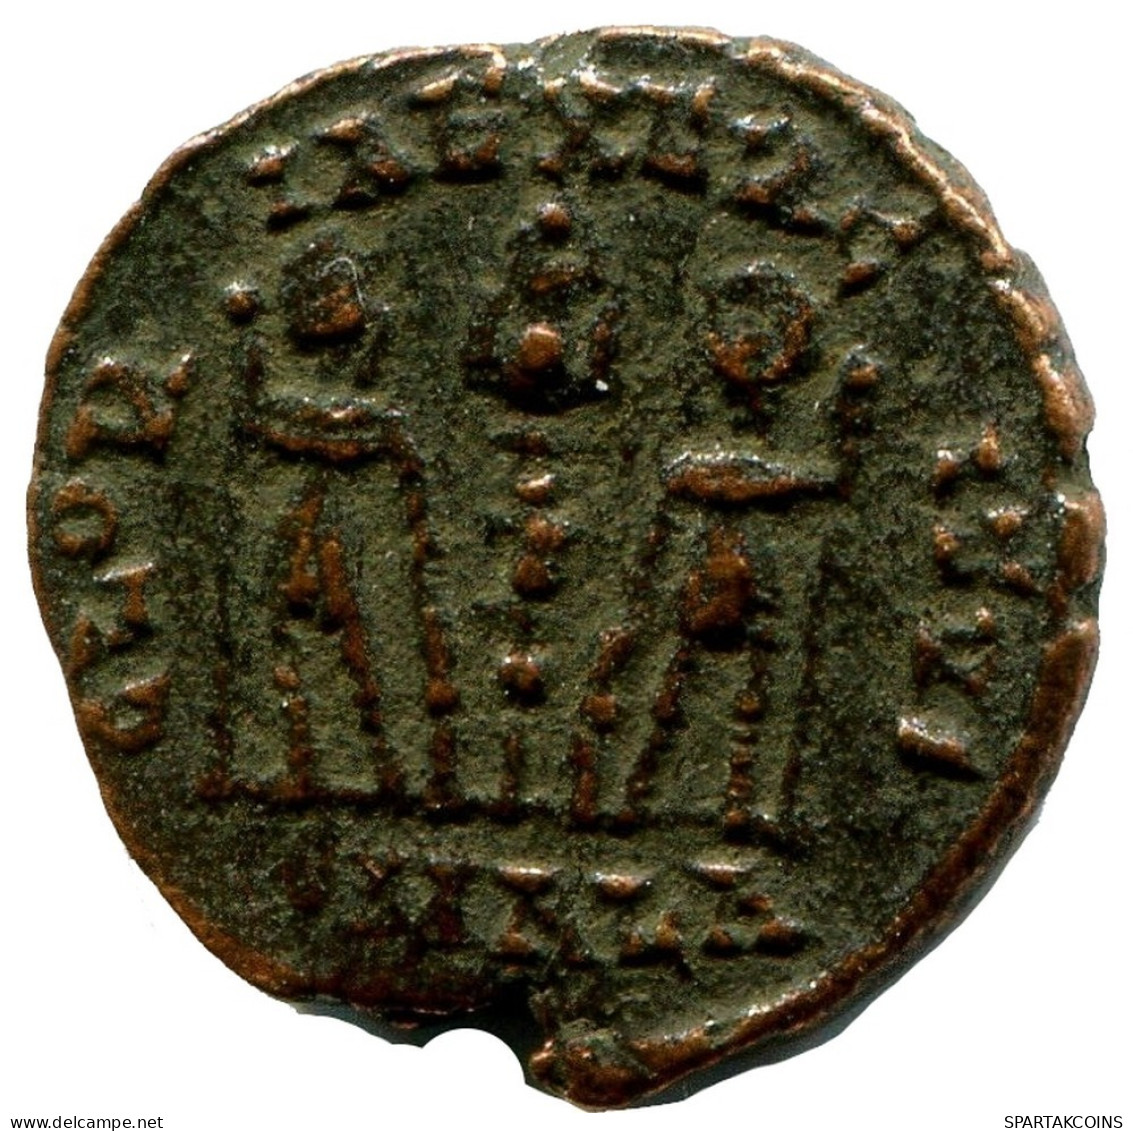 CONSTANS MINTED IN ALEKSANDRIA FOUND IN IHNASYAH HOARD EGYPT #ANC11466.14.D.A - The Christian Empire (307 AD To 363 AD)